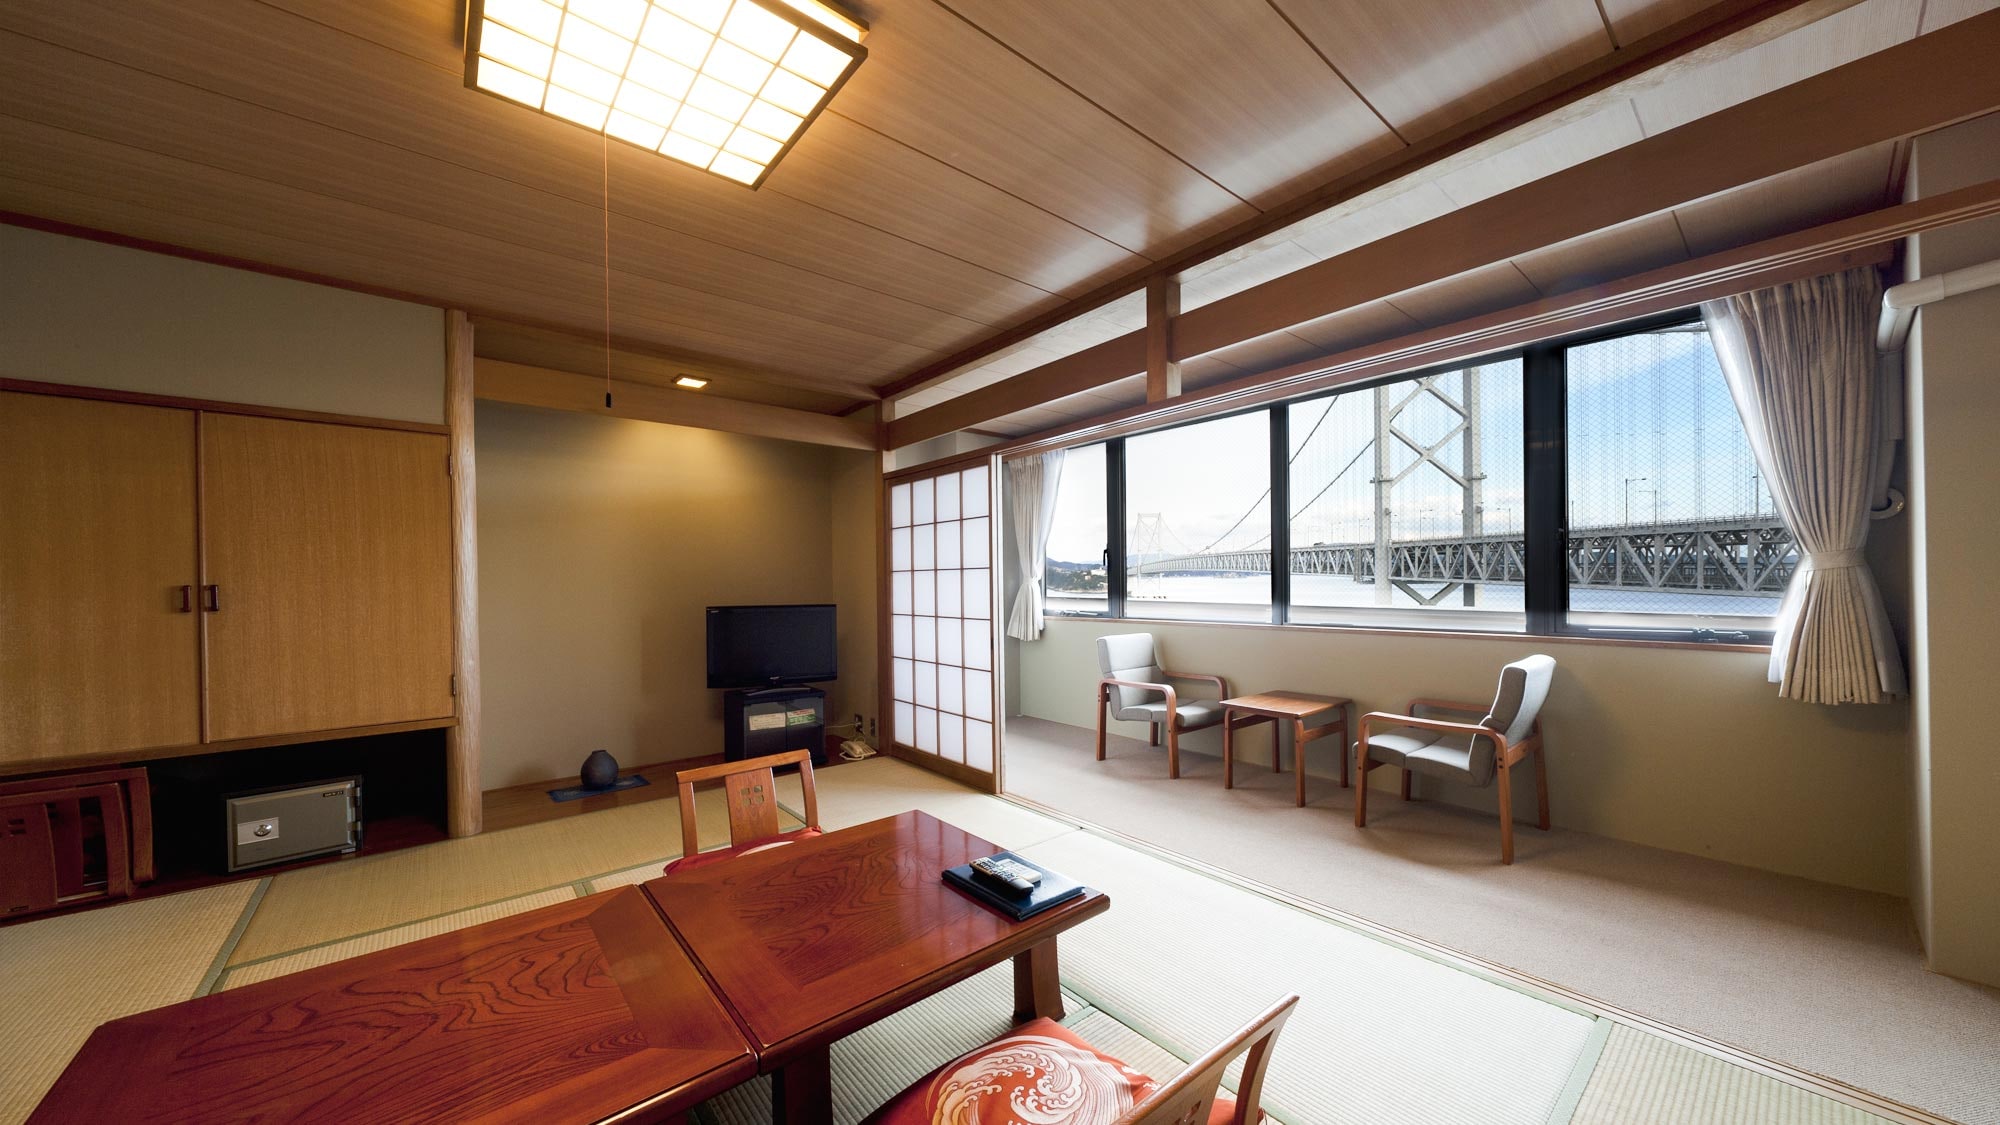 Impressive view overlooking the Naruto Strait Japanese-style room 10 tatami mats